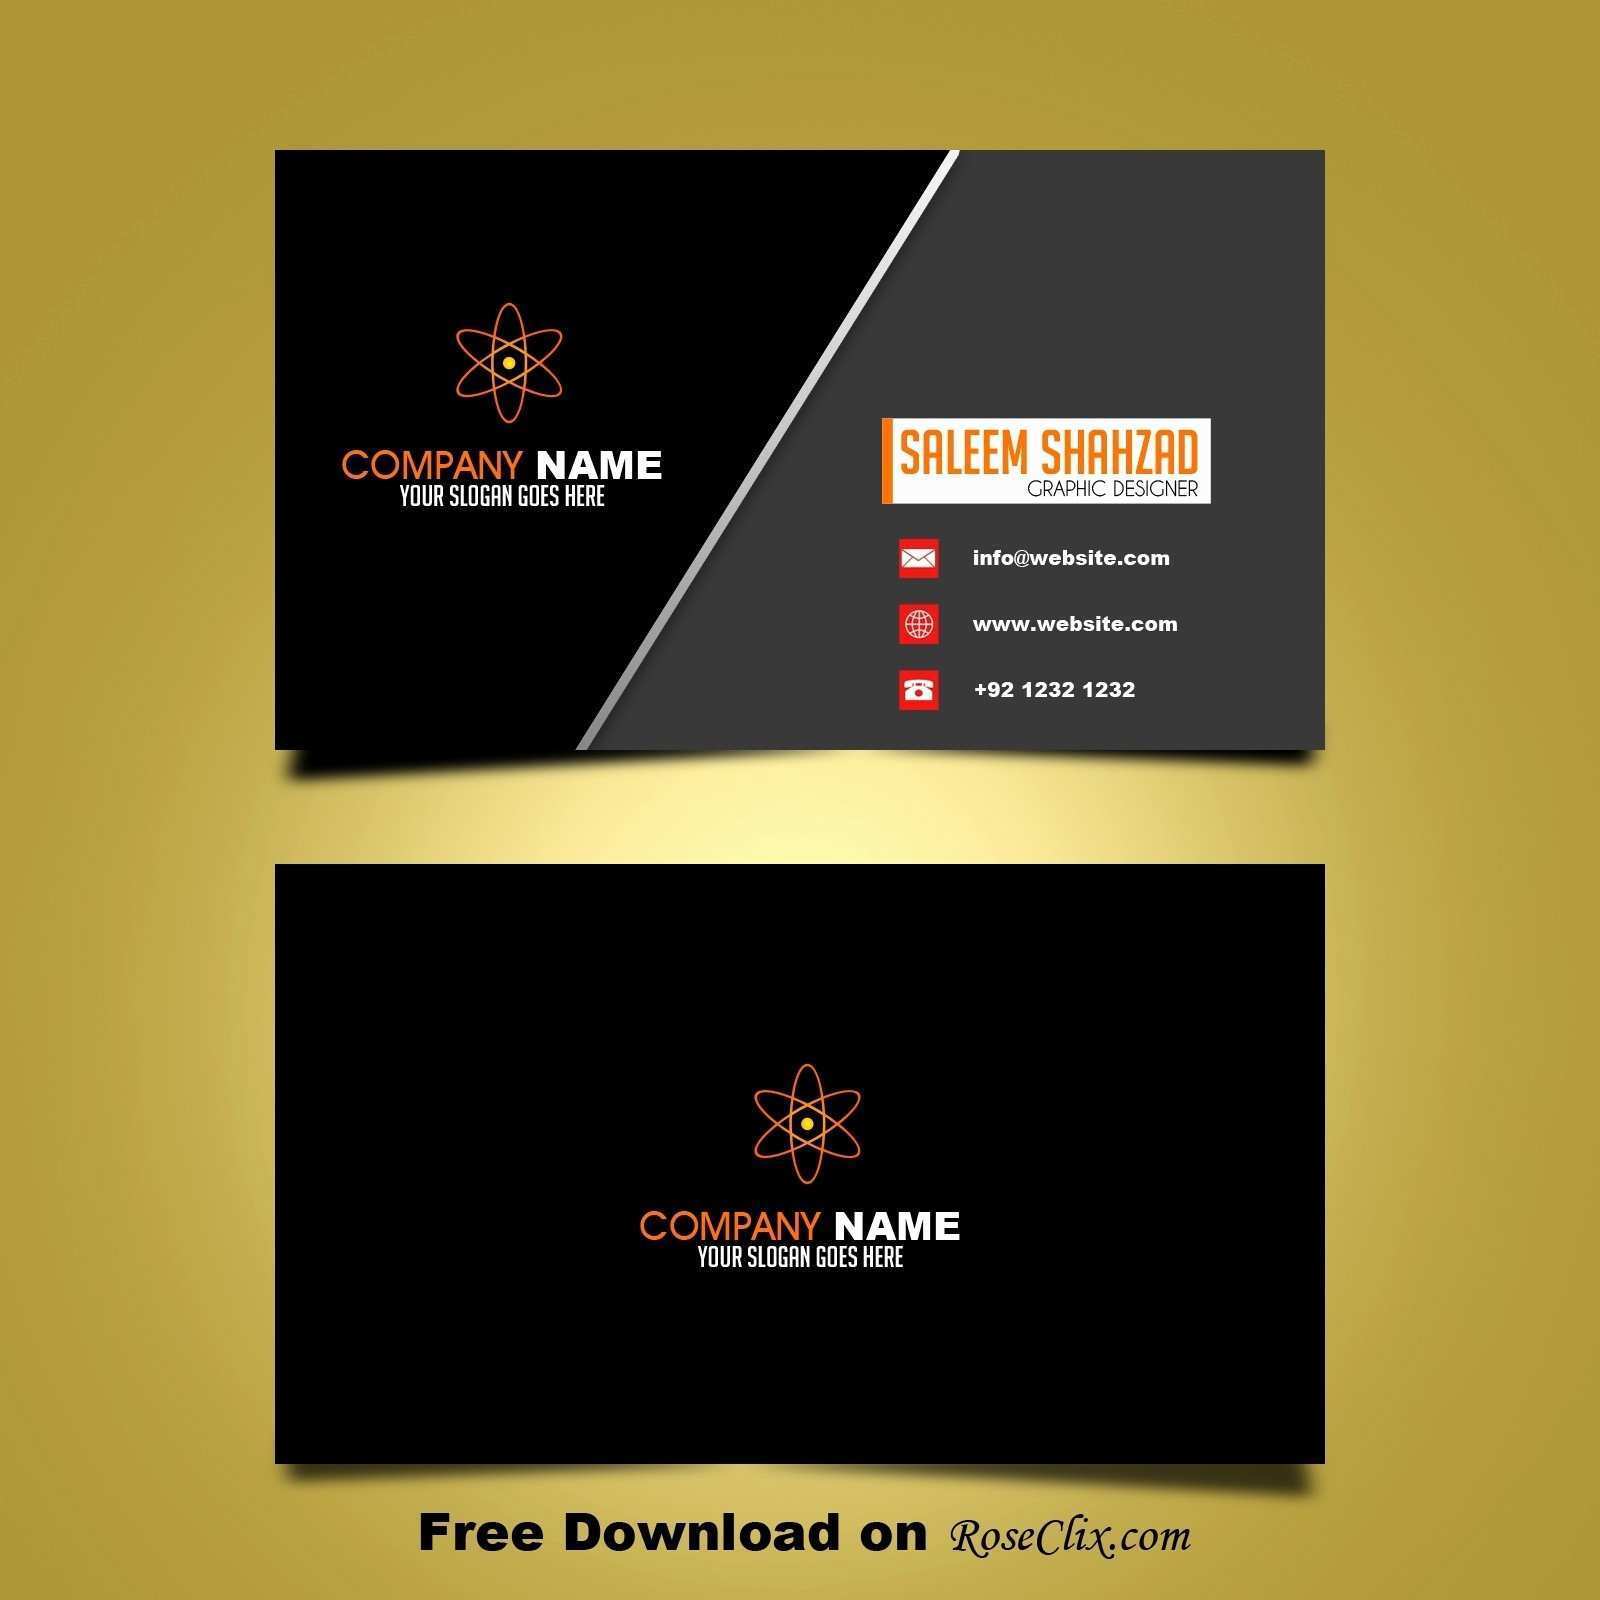 31 Visiting Photoshop Cs6 Business Card Template Download Maker with Photoshop Cs6 Business Card Template Download